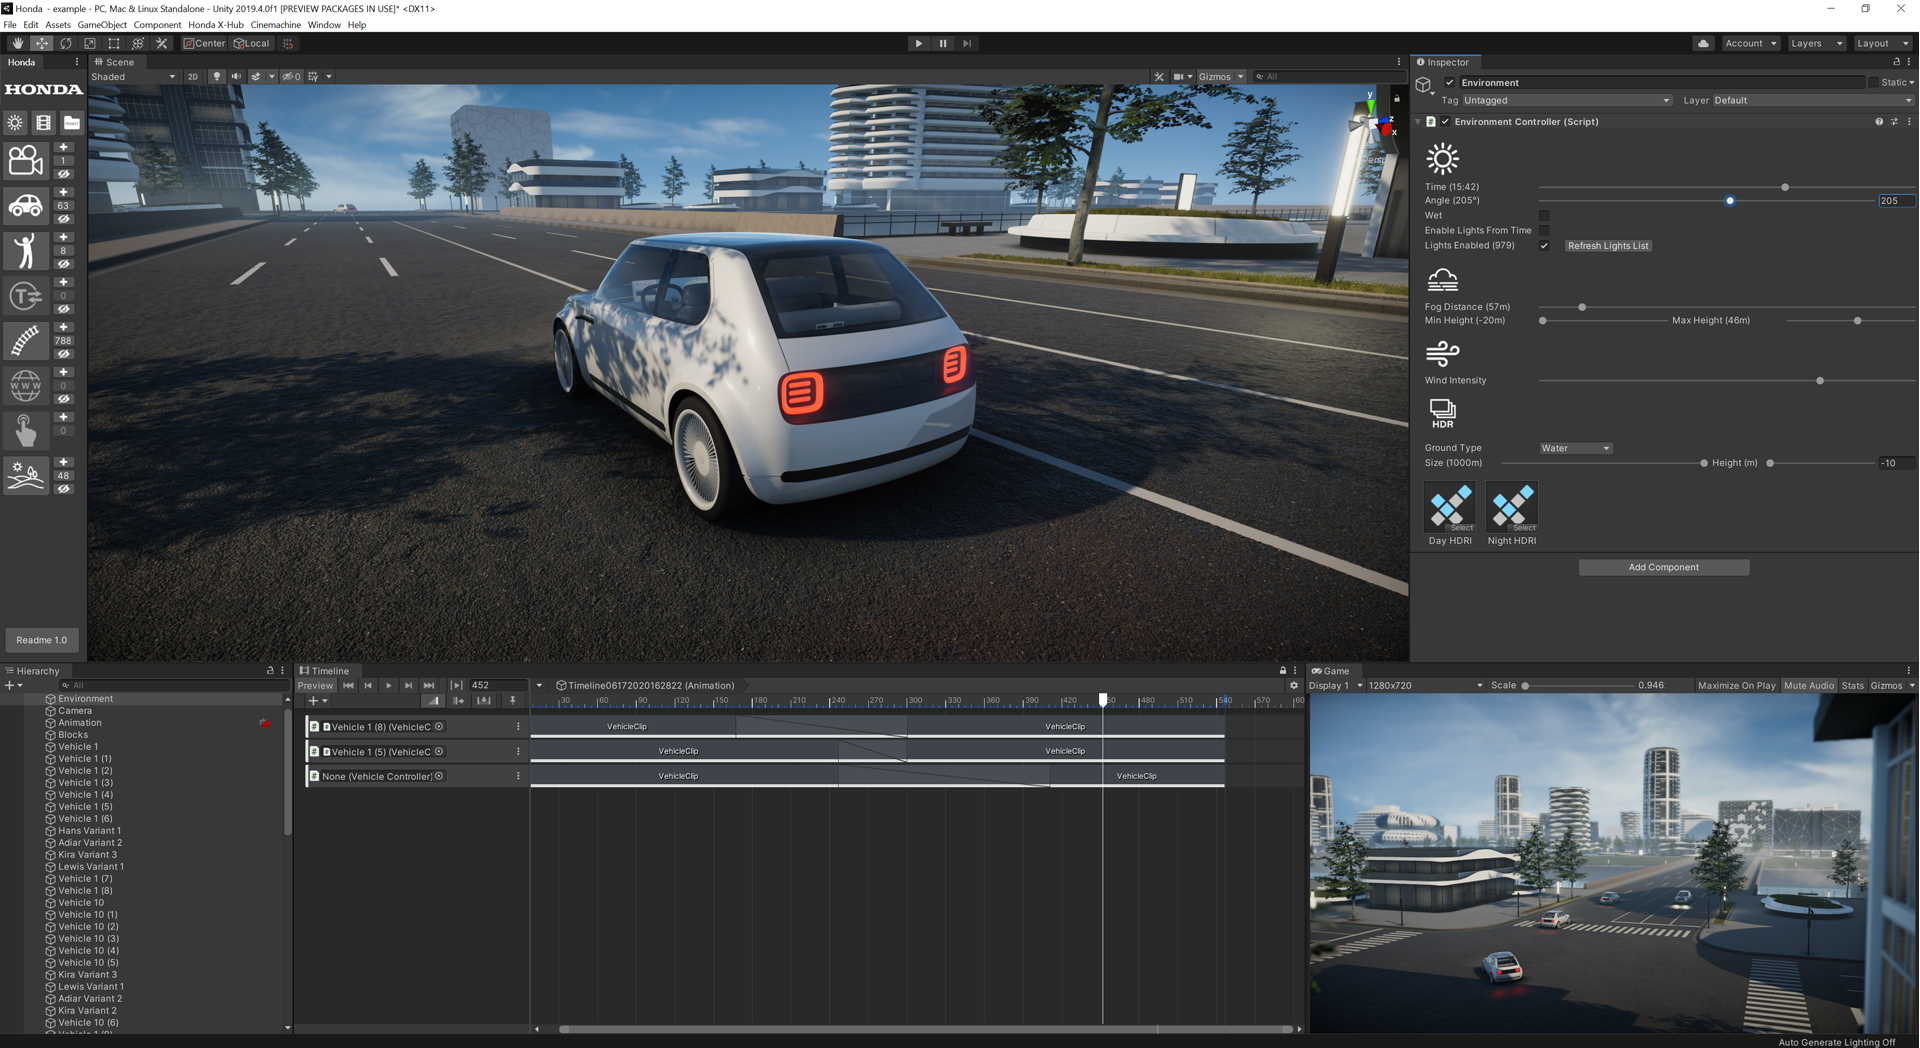 Honda extended the Unity Editor to meet the needs of its automotive designers with limited Unity expertise